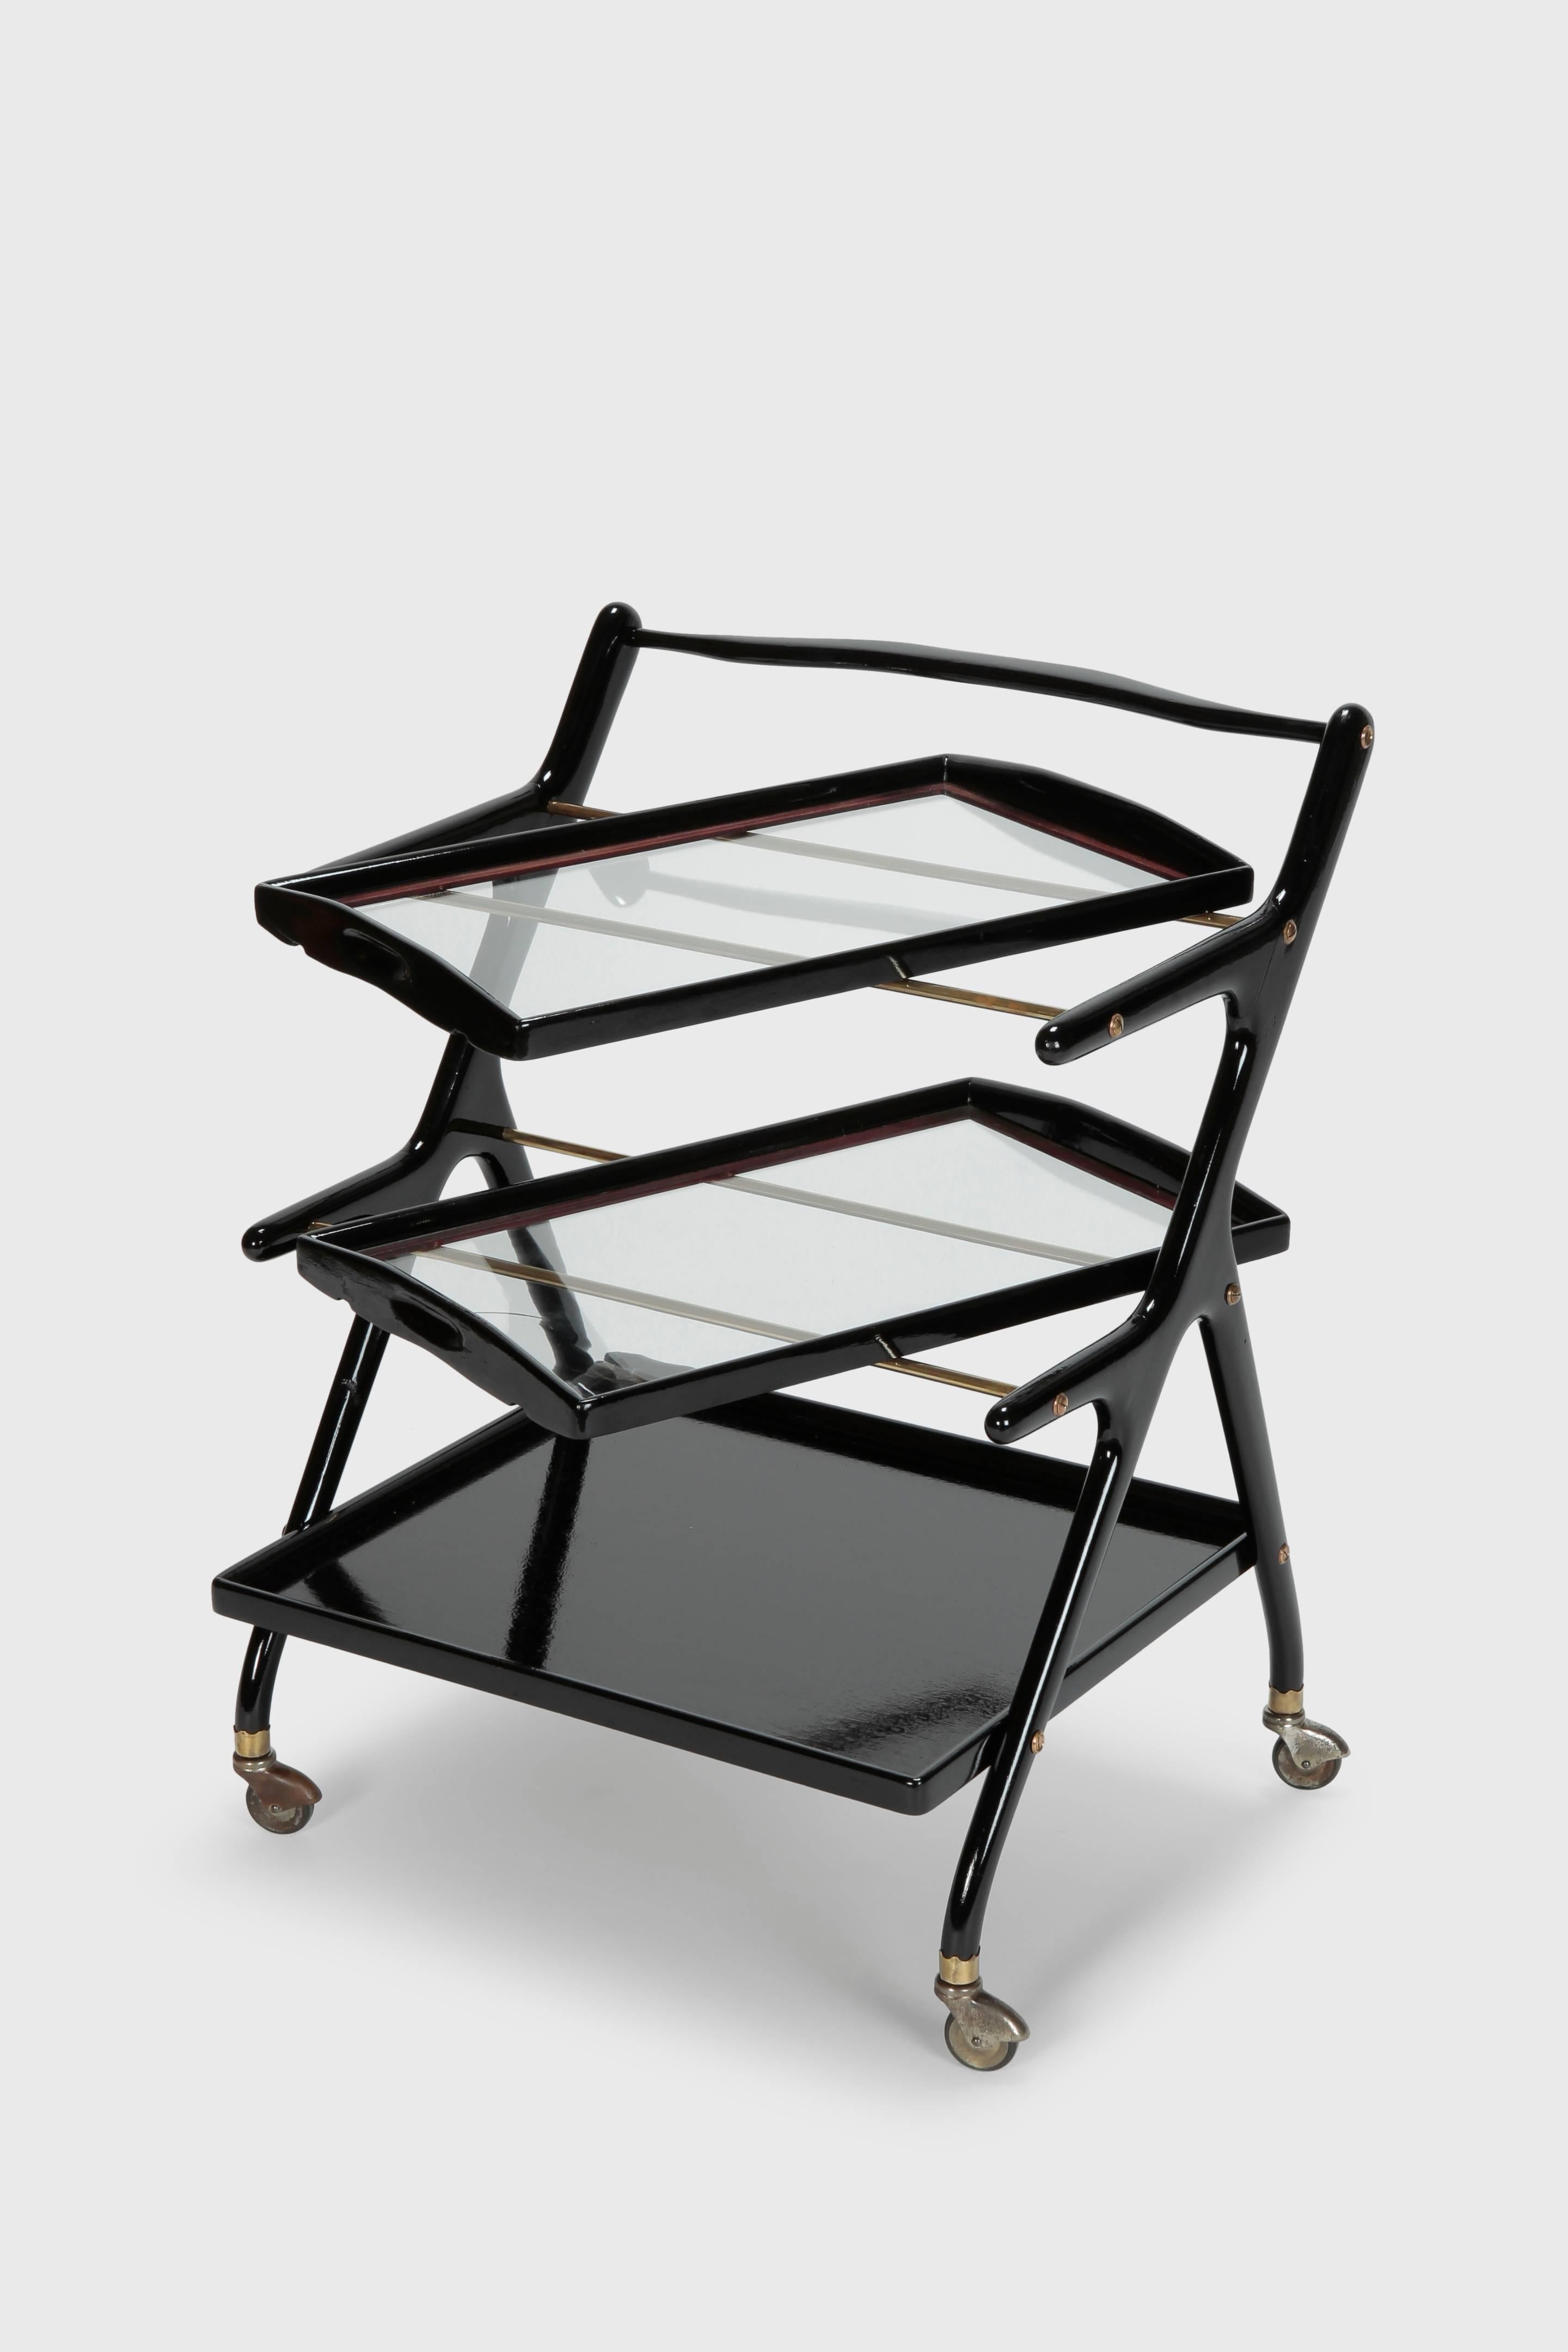 Brass Cesare Lacca Bar Cart Mahogany Serving Trolley, 1950